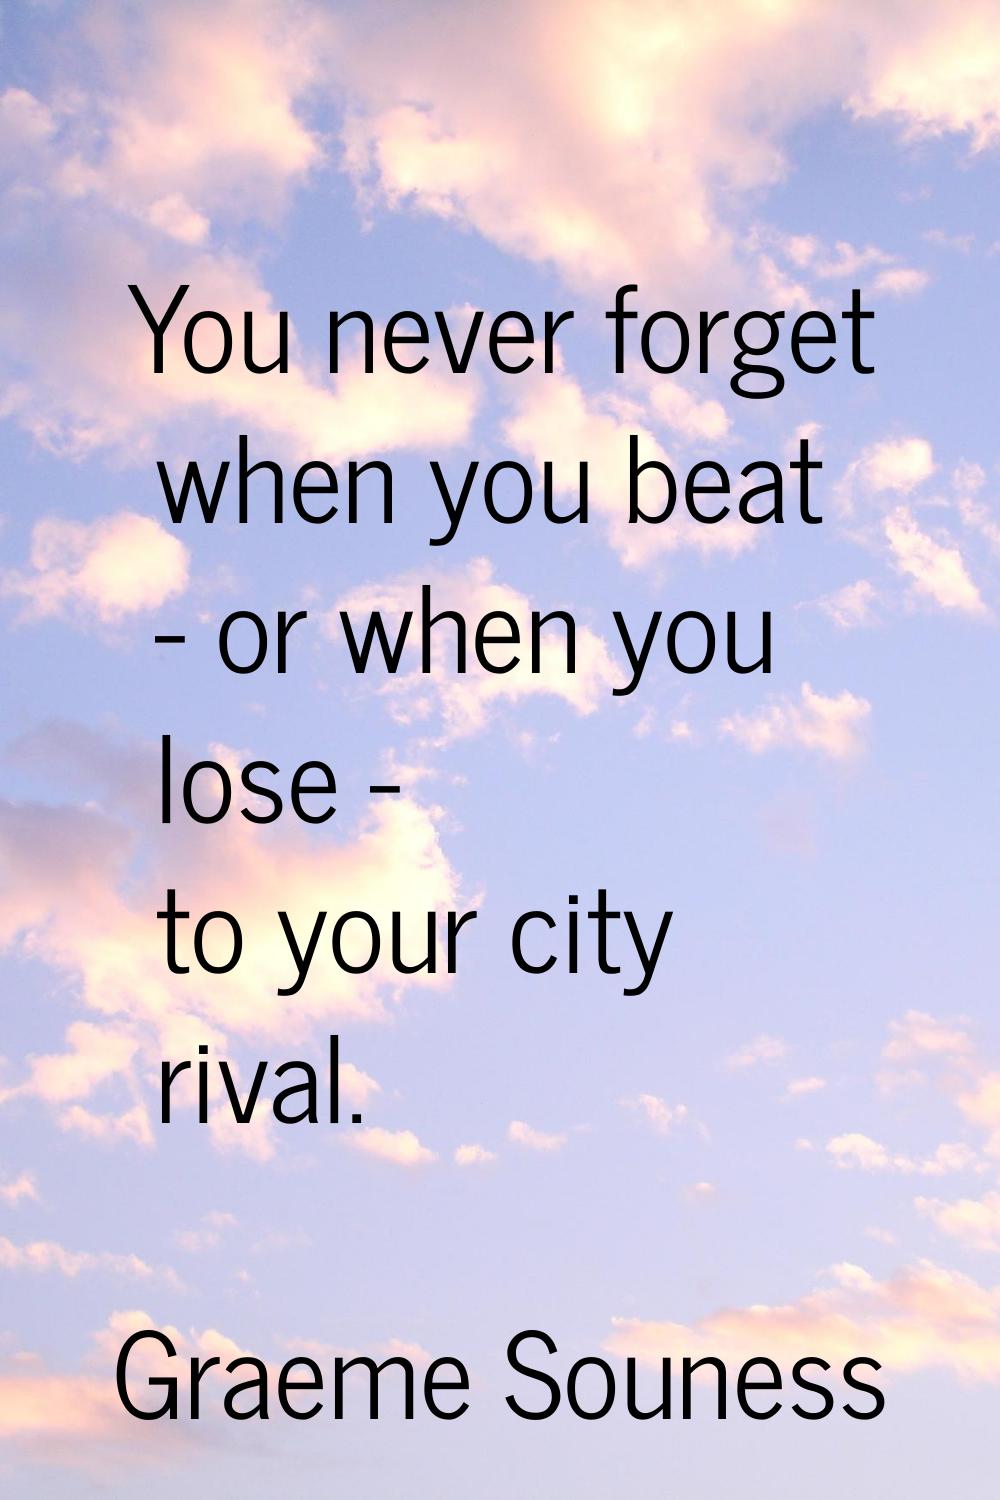 You never forget when you beat - or when you lose - to your city rival.